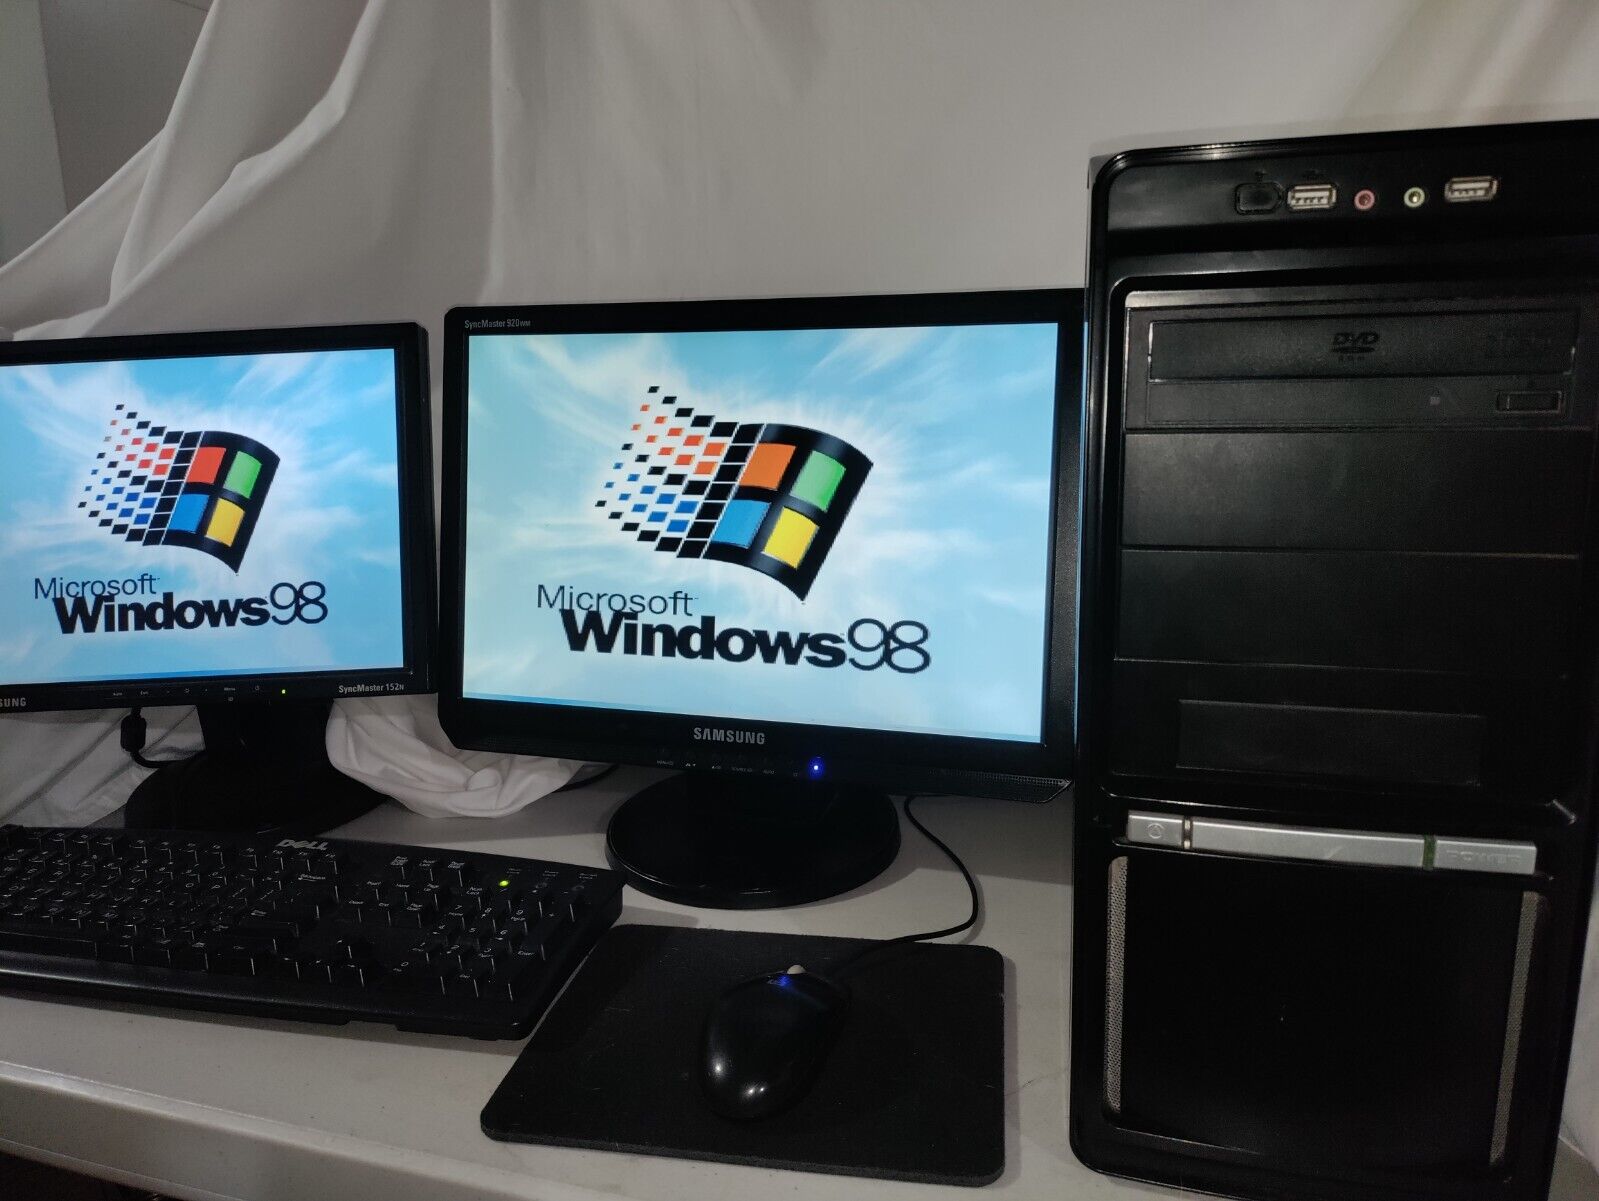 RETRO WINDOWS 98 ULTRA FAST INDUSTRIAL / GAMING COMPUTER VINTAGE PC DUAL MONITOR